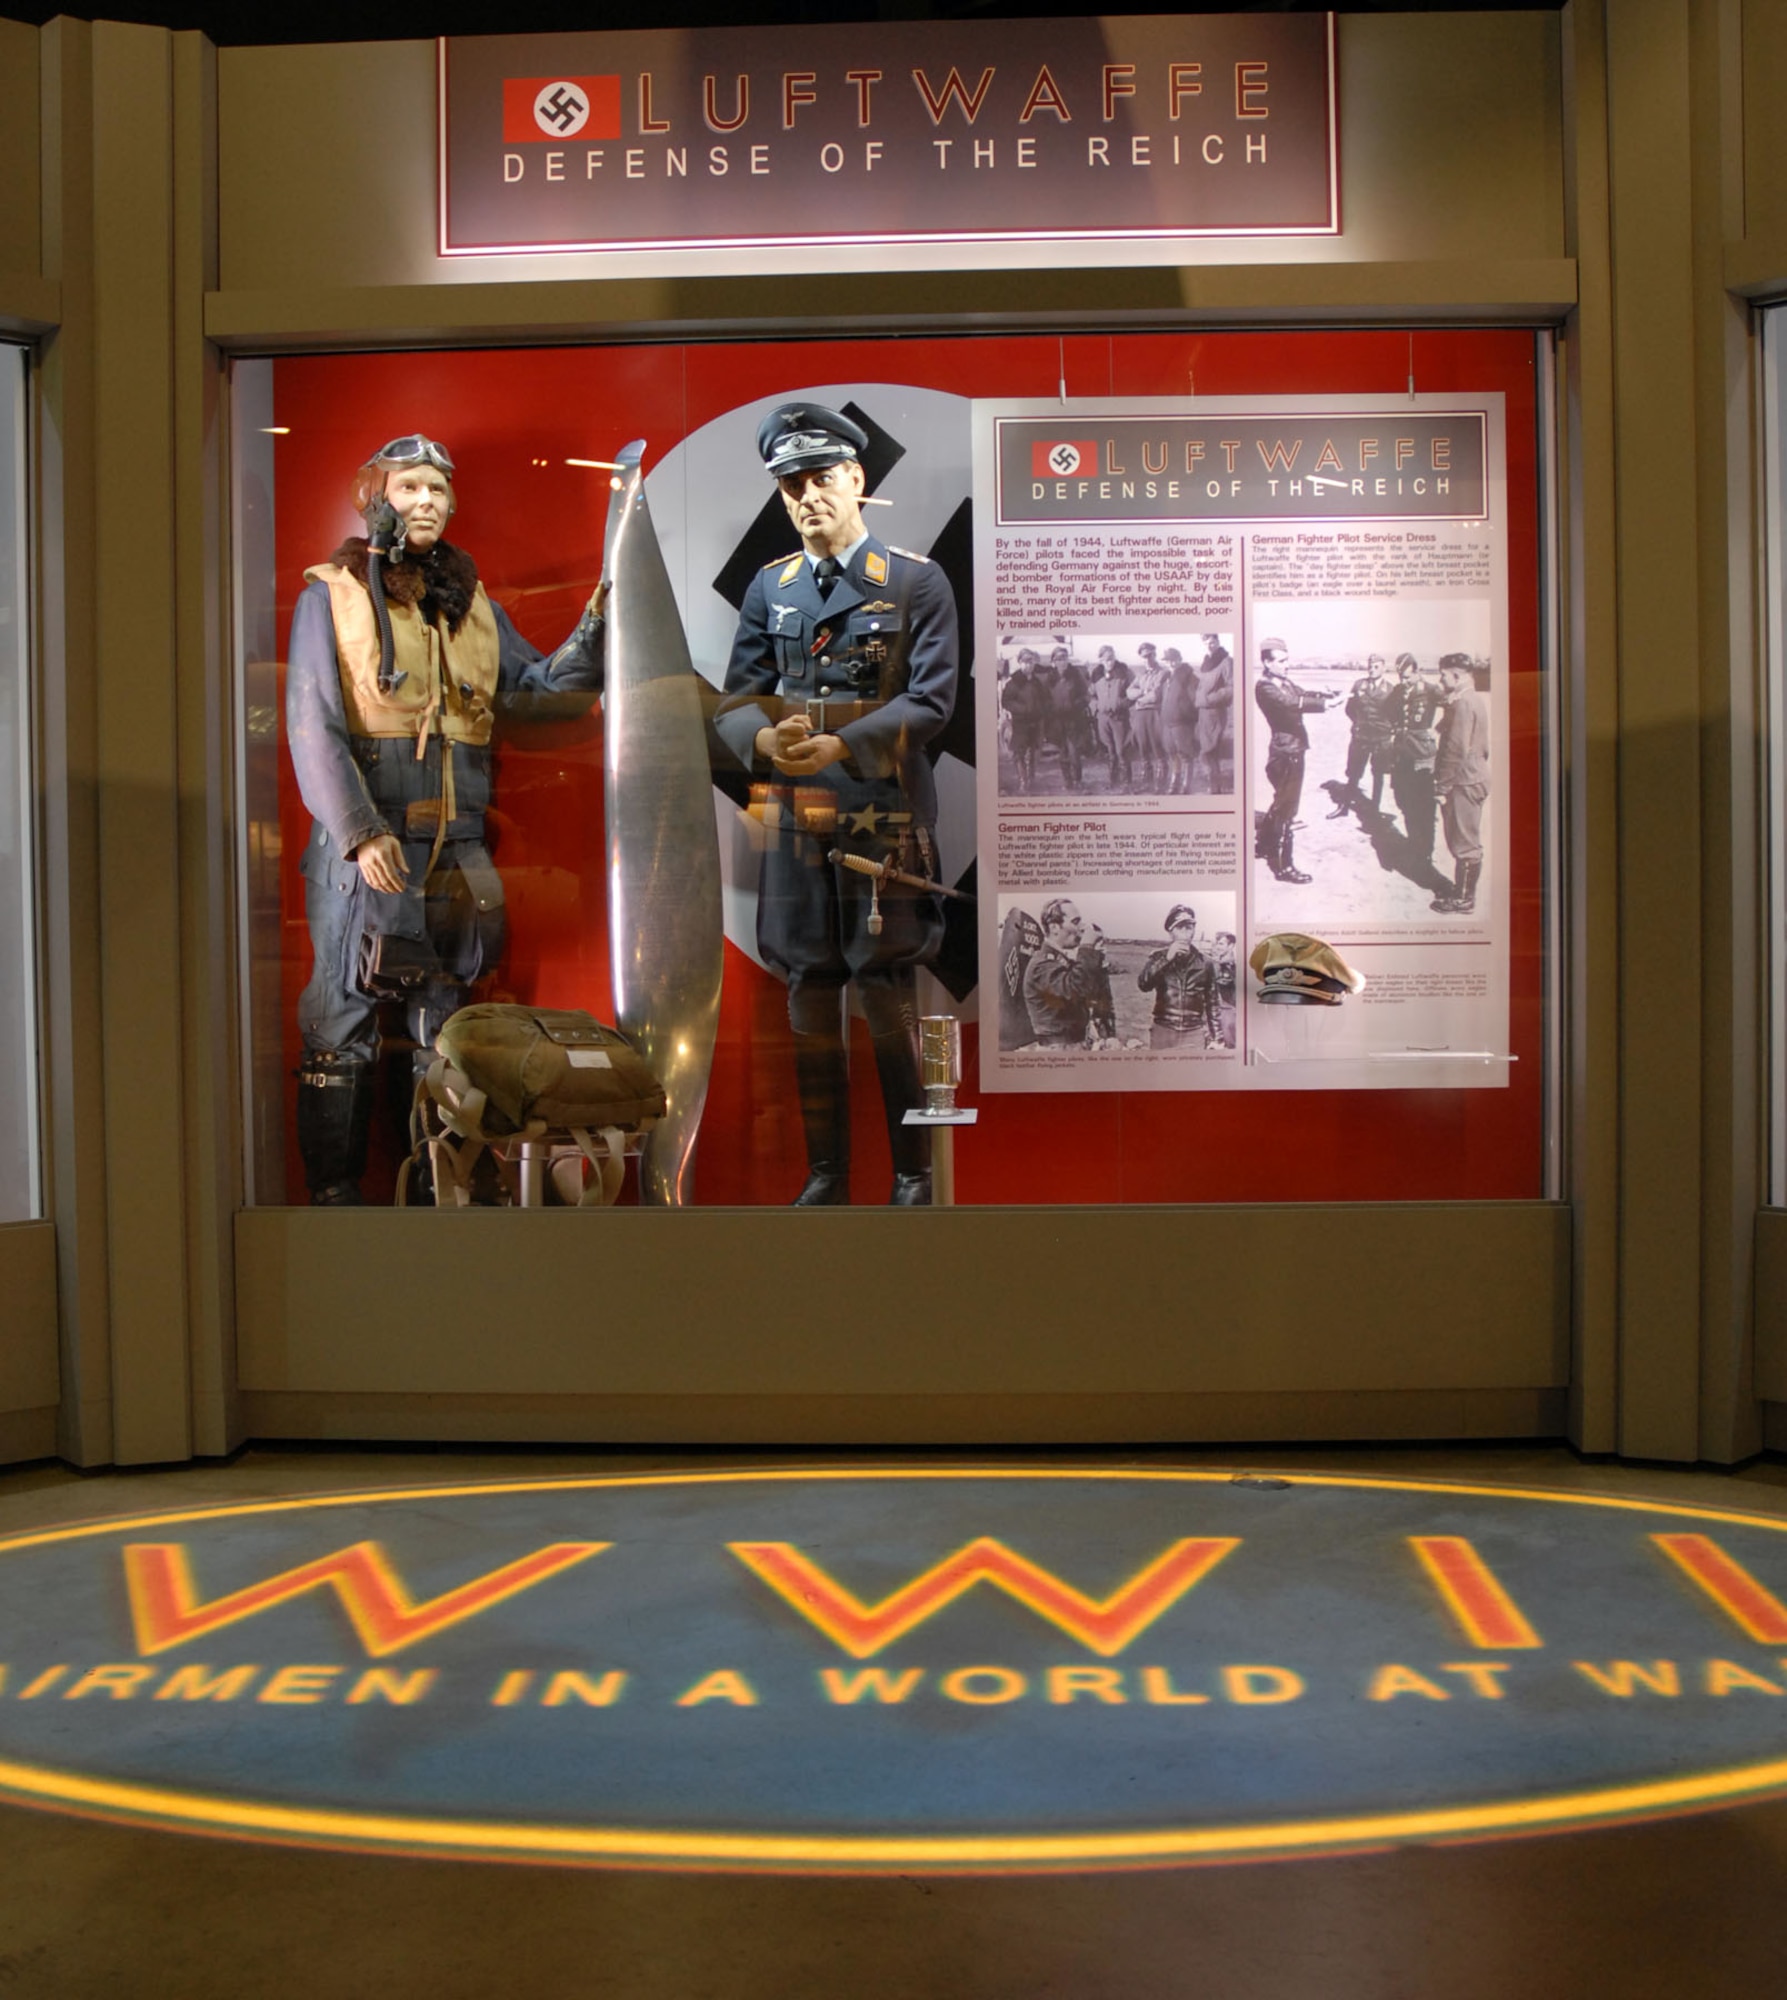 DAYTON, Ohio - The Luftwaffe portion of the WWII: Airmen in a World at War exhibit in the World War II Gallery at the National Museum of the U.S. Air Force. (U.S. Air Force photo)